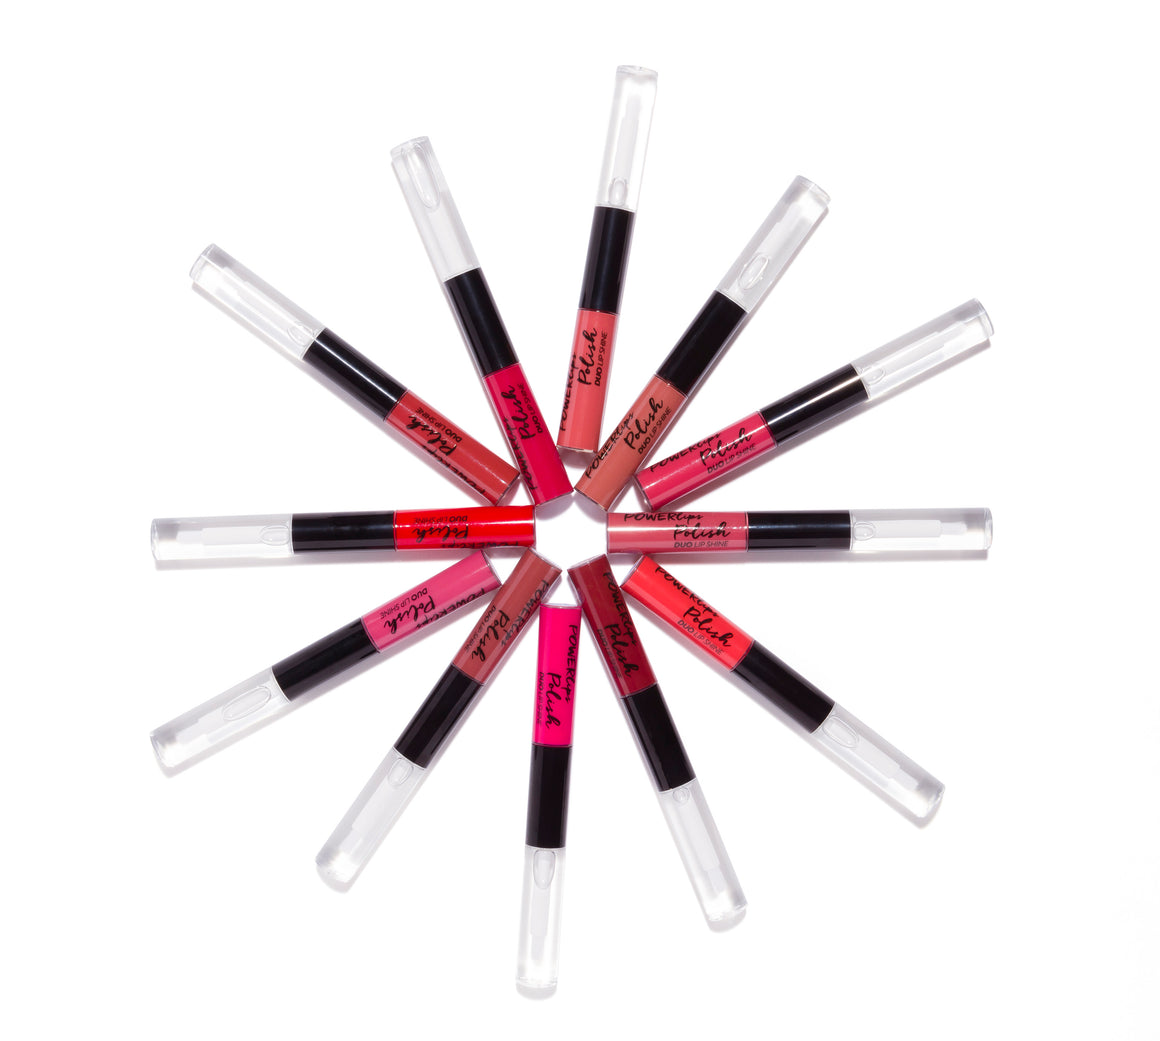 Buy 3 PowerLips - MATTE or POLISH, get the 4th FREE